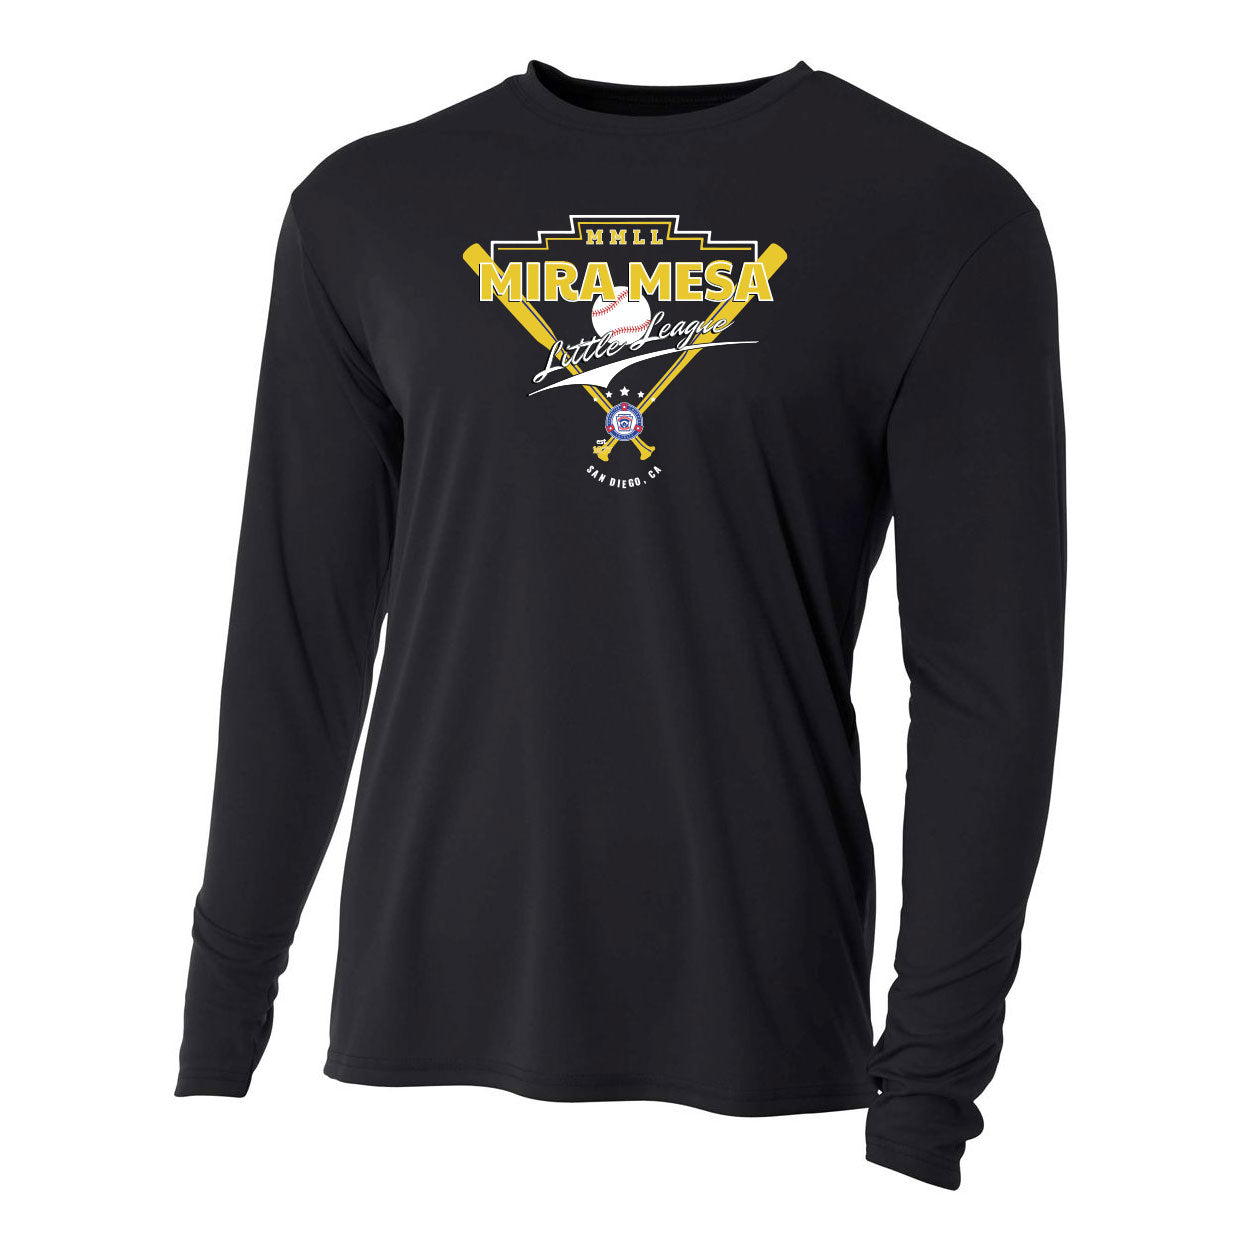 MIRA MESA LITTLE LEAGUE LEGACY YOUTH COOLING PERFORMANCE LONG SLEEVE CREW